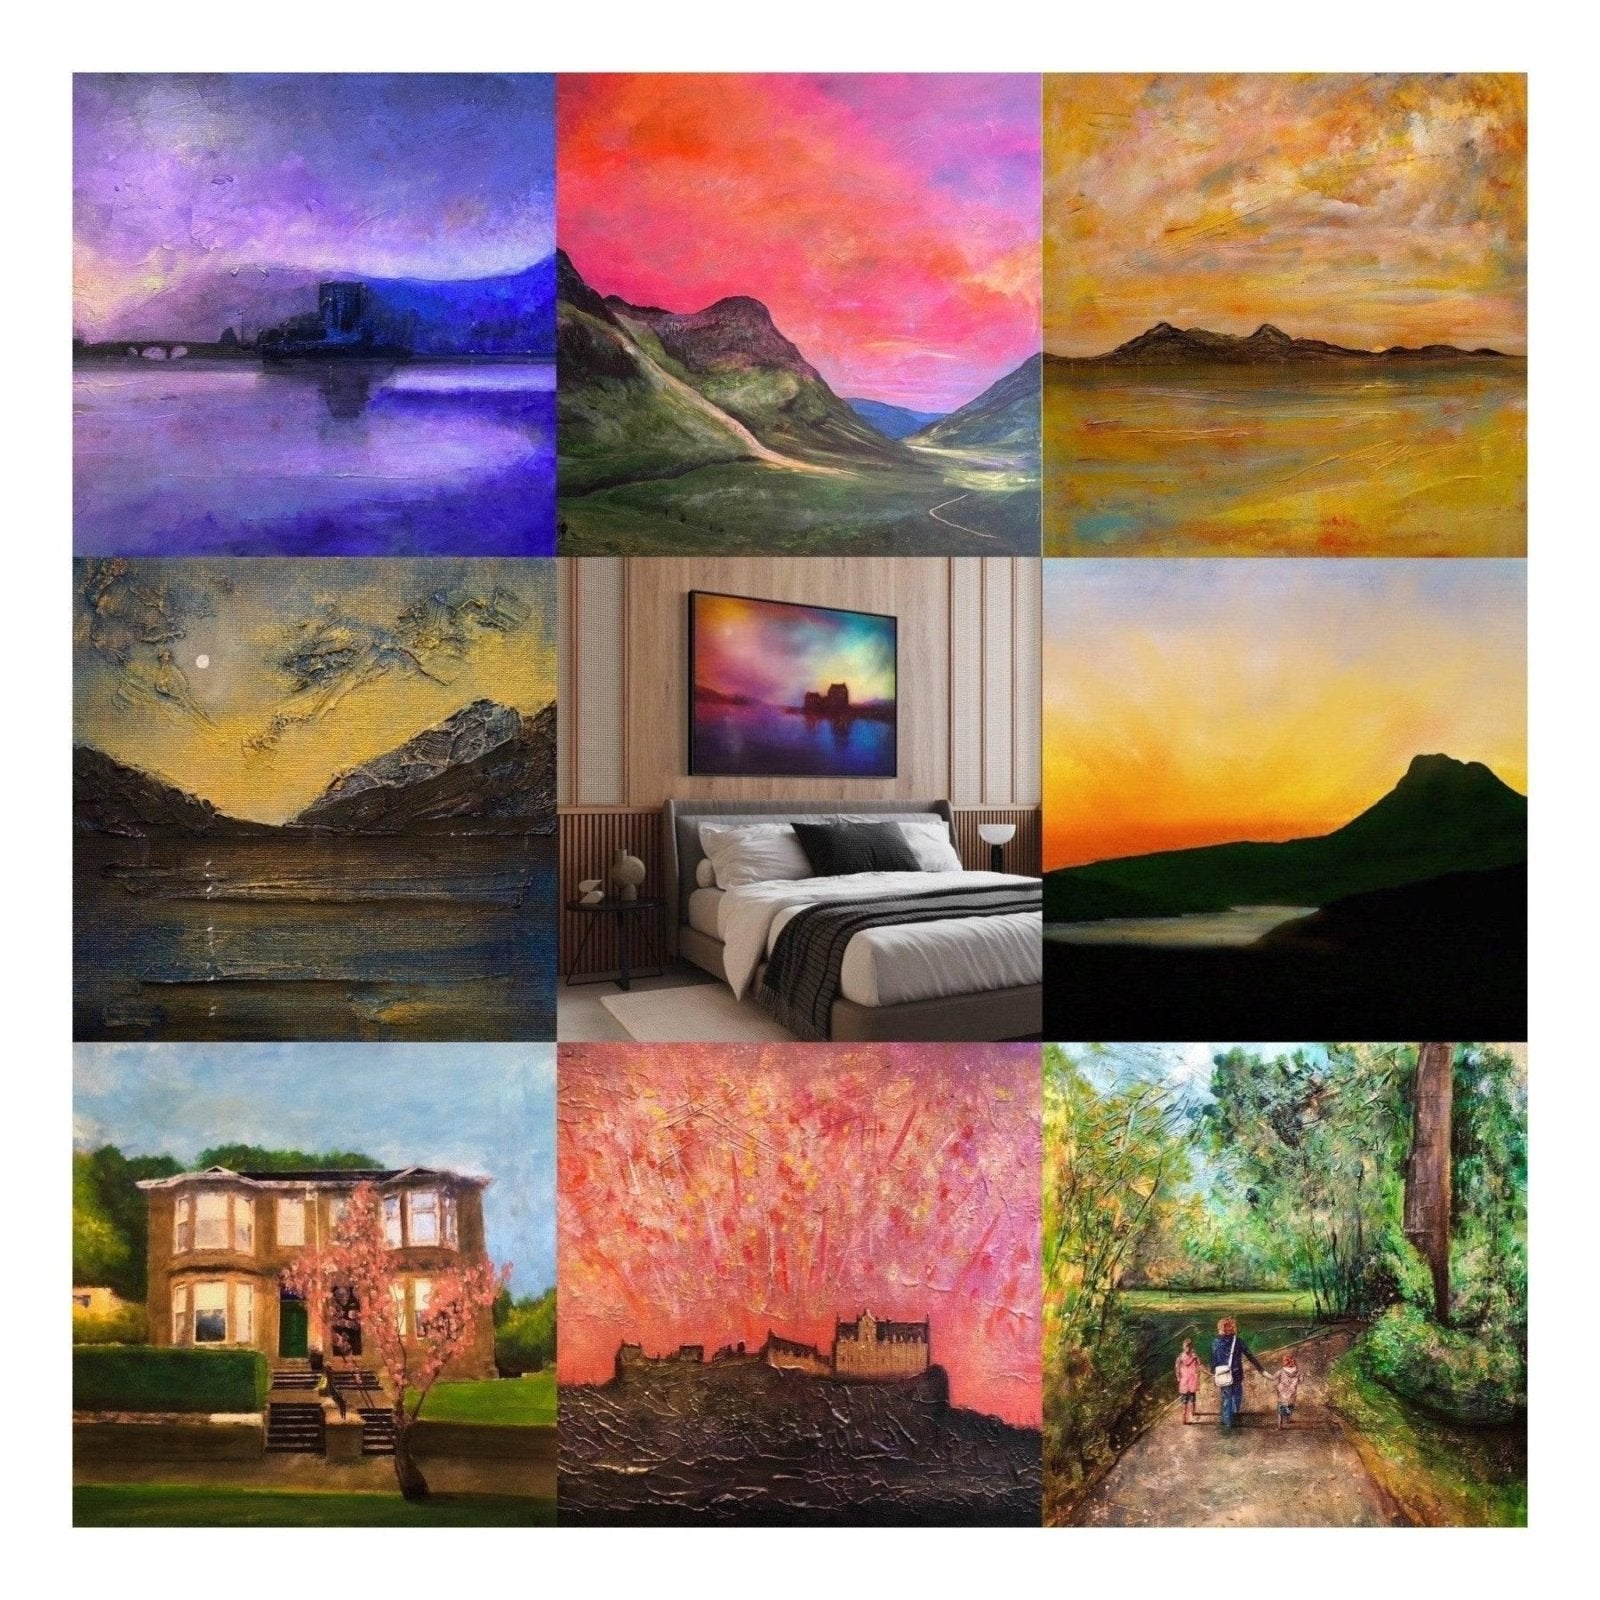 Commission Request Original Landscape Paintings From Scotland-Original Paintings-Commission An Original Painting-Ask to be contacted by email-Paintings, Prints, Homeware, Art Gifts From Scotland By Scottish Artist Kevin Hunter